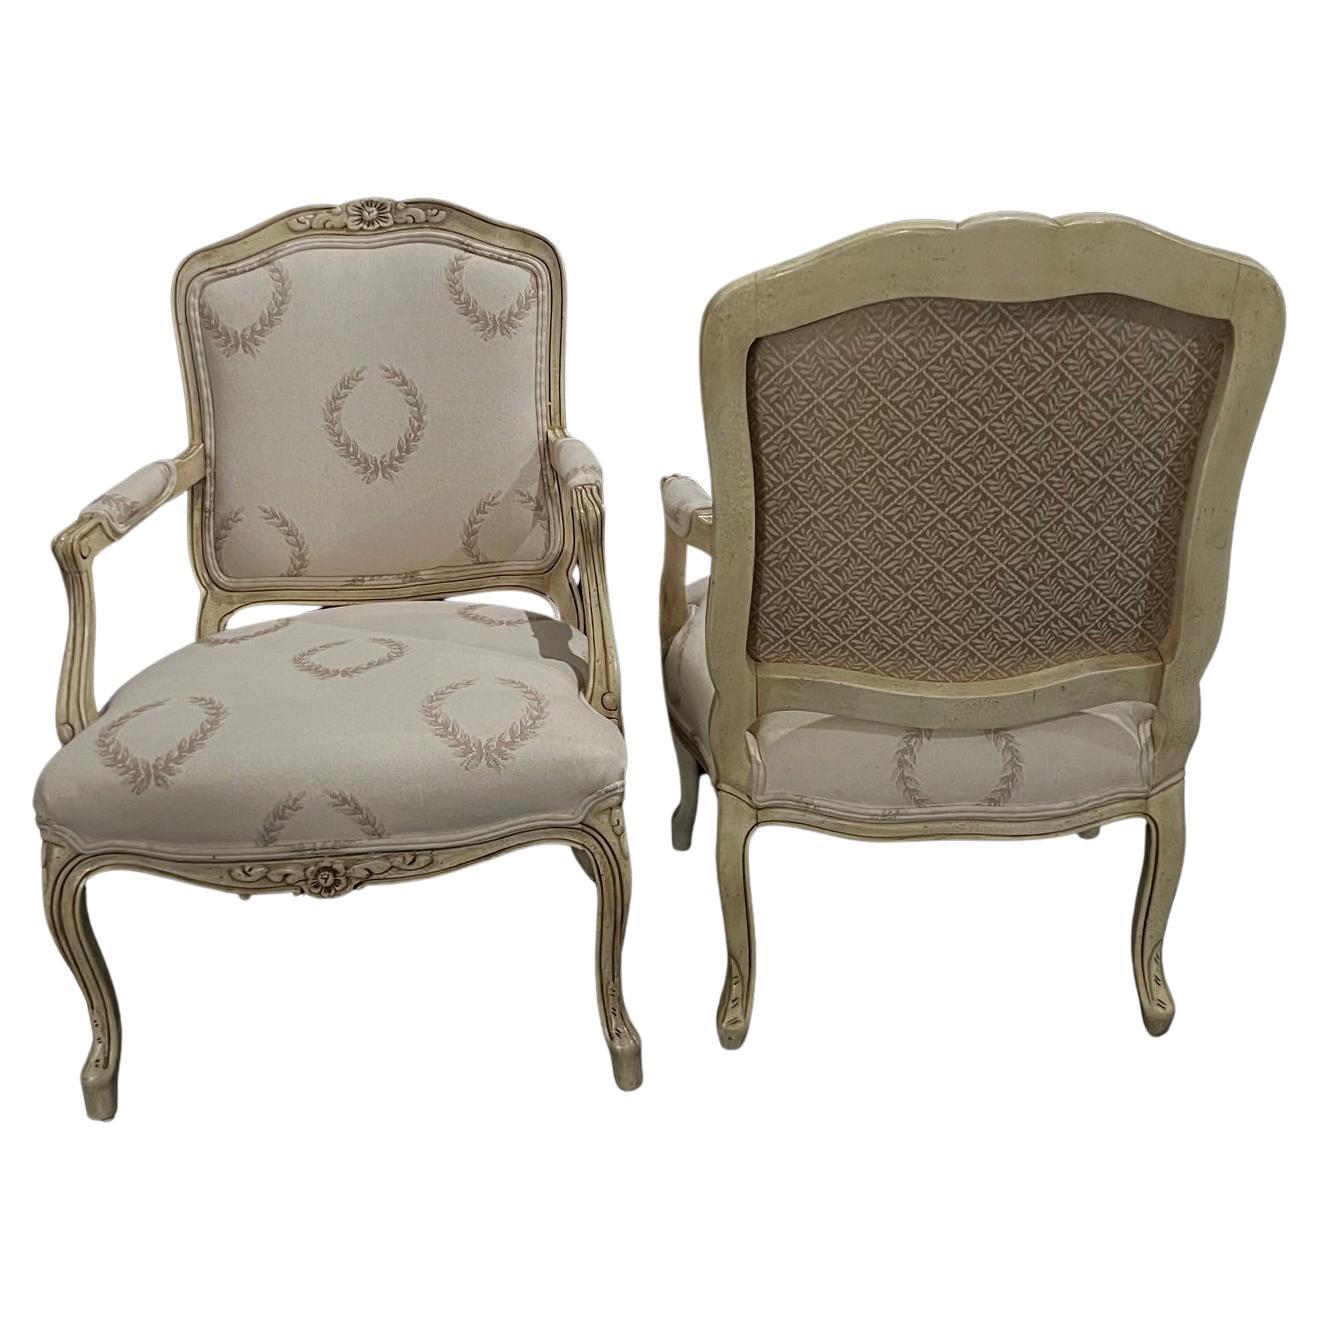 Classic Pair of French Louis XV Style Painted UpholsteredArmchairs or Fauteuils  For Sale